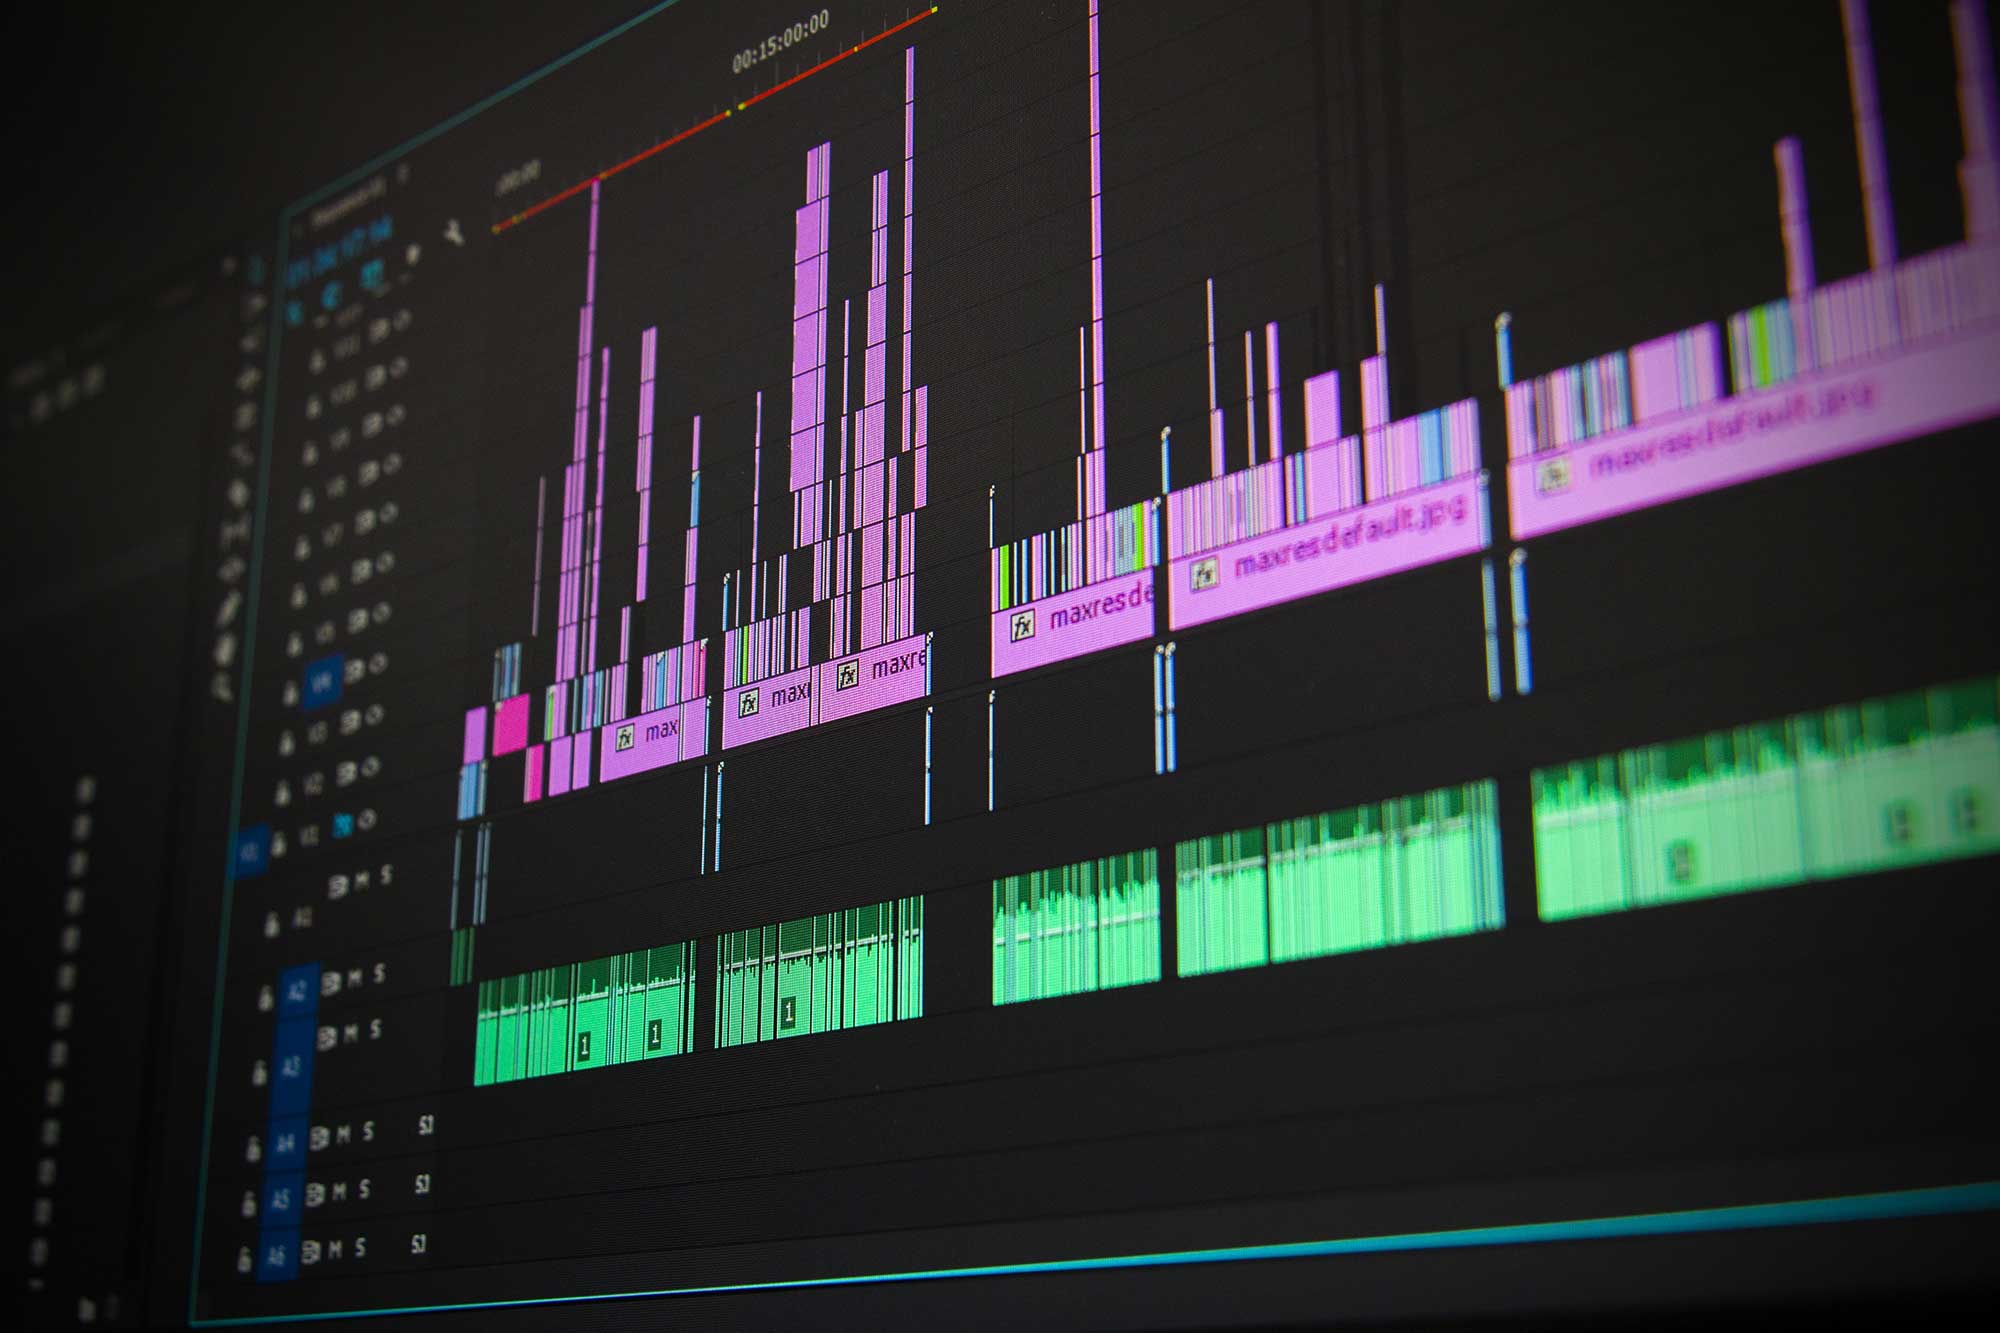 A video being edited in an Adobe Premiere Pro timeline.